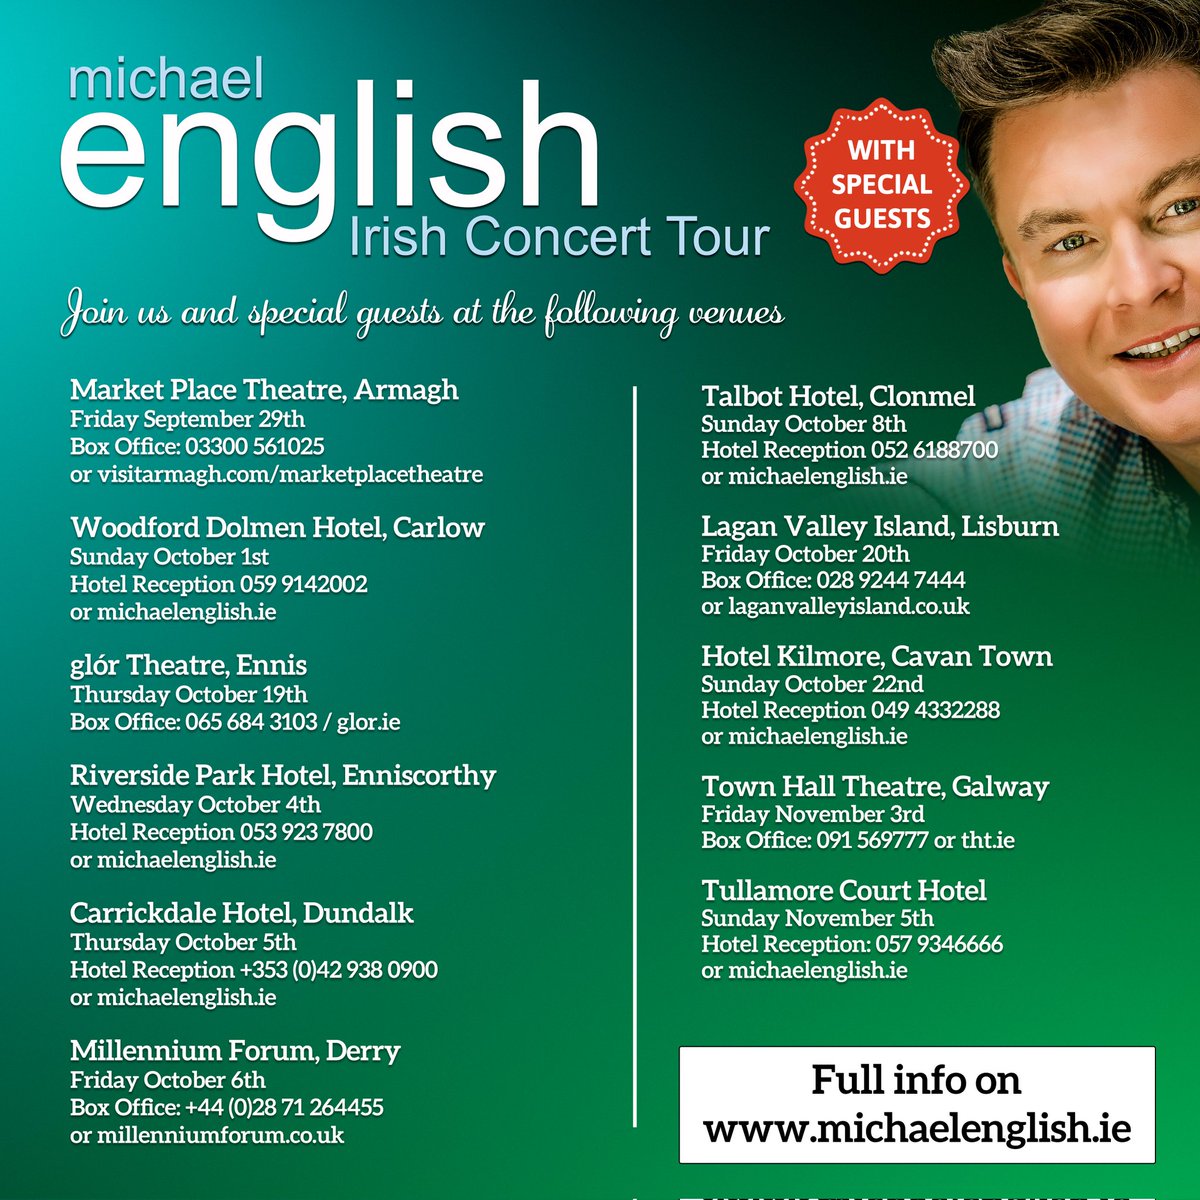 Join me on my Concert Tour this Autumn. Tickets on sale now!